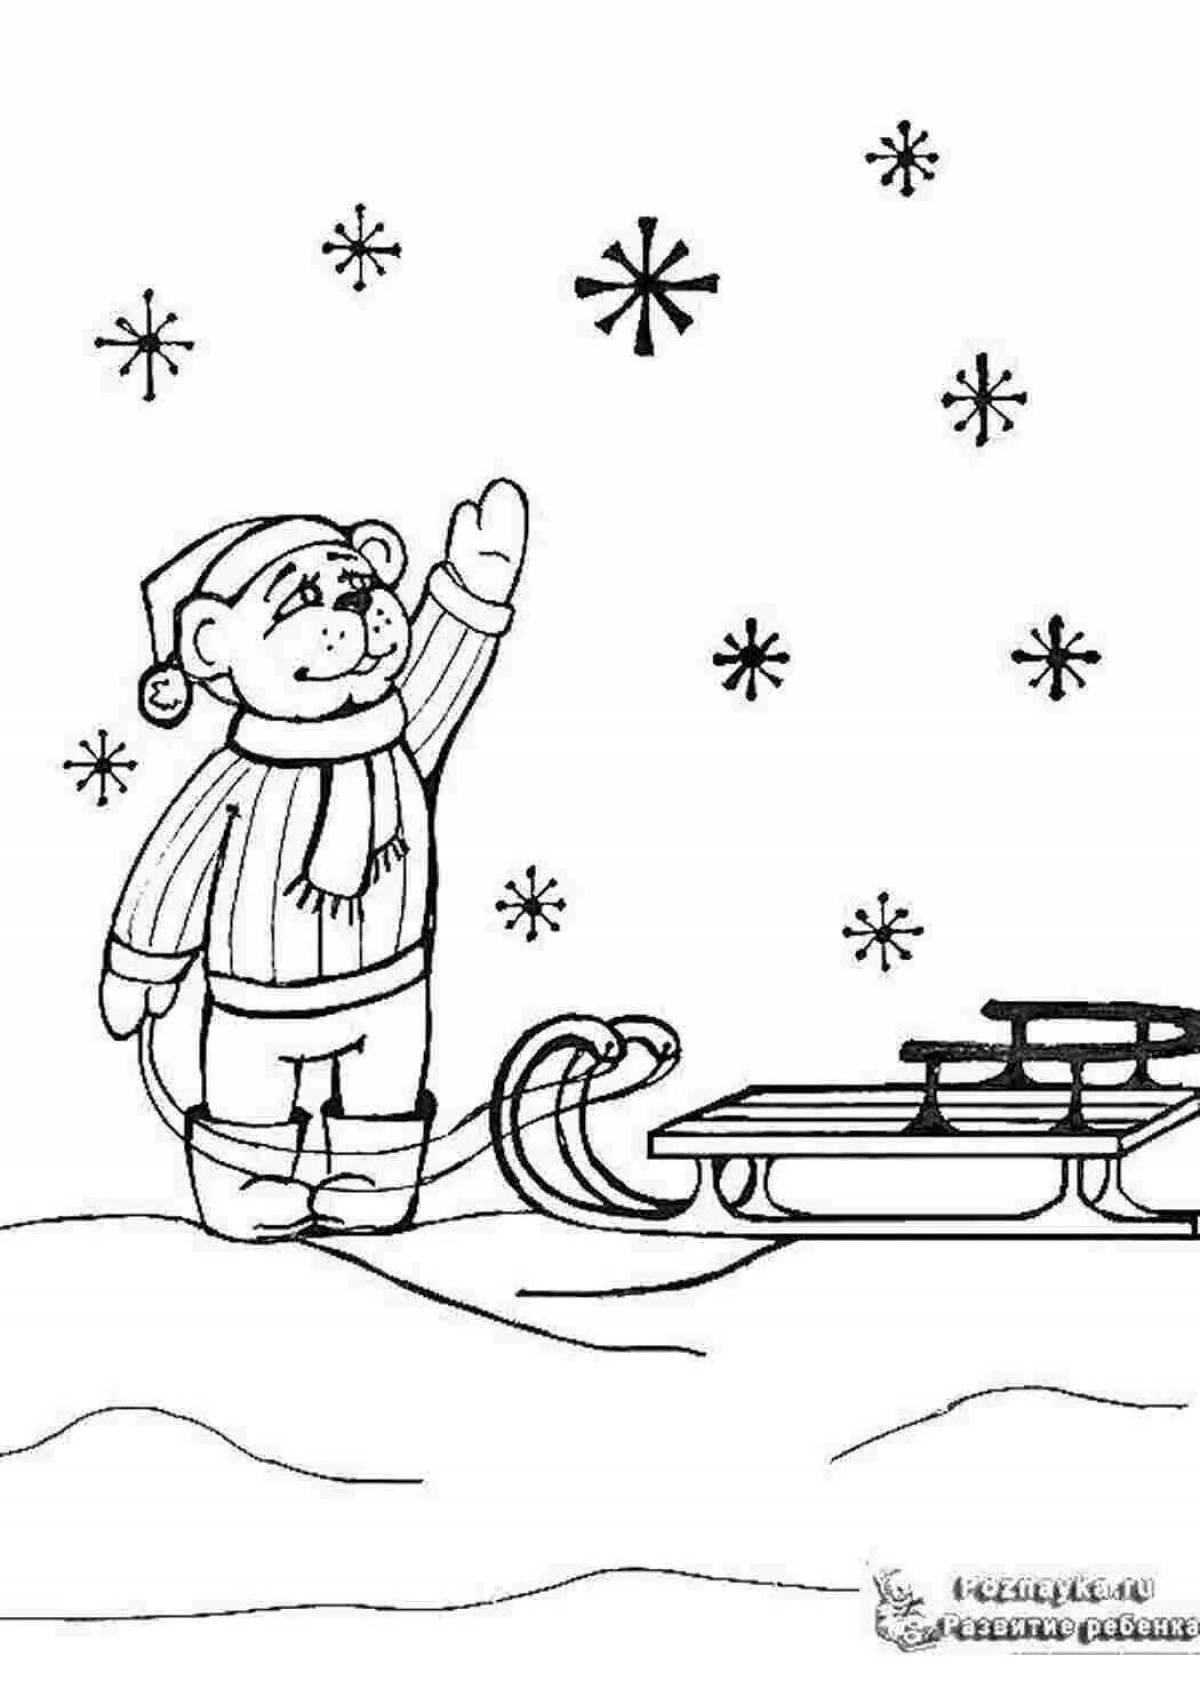 Radiant it's snowing coloring page for kids